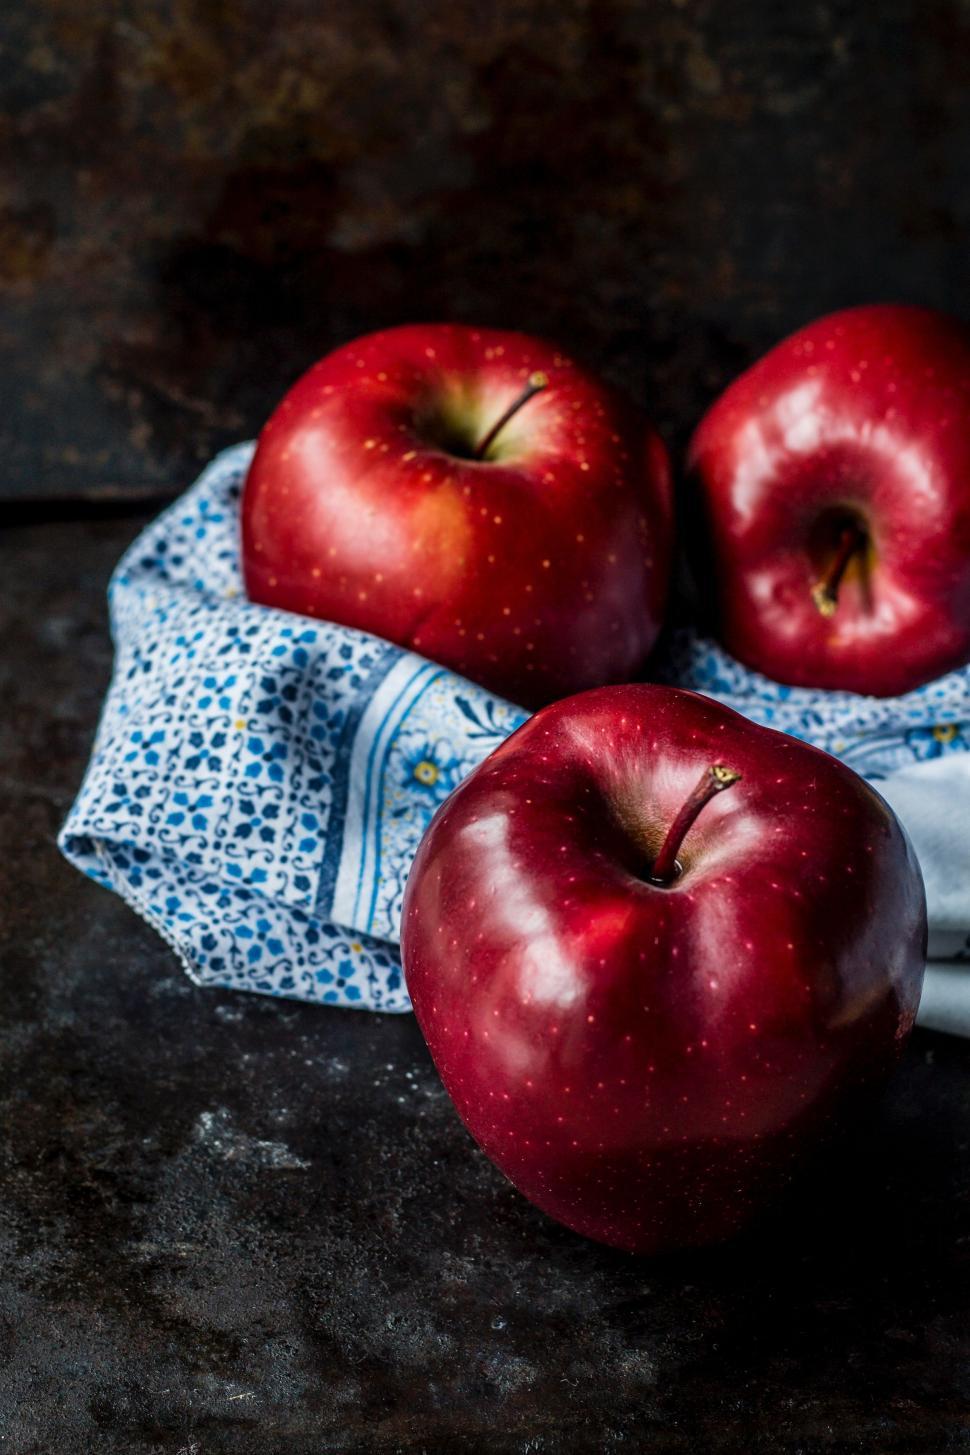 Free Image of Three Red Apples on Blue Cloth 